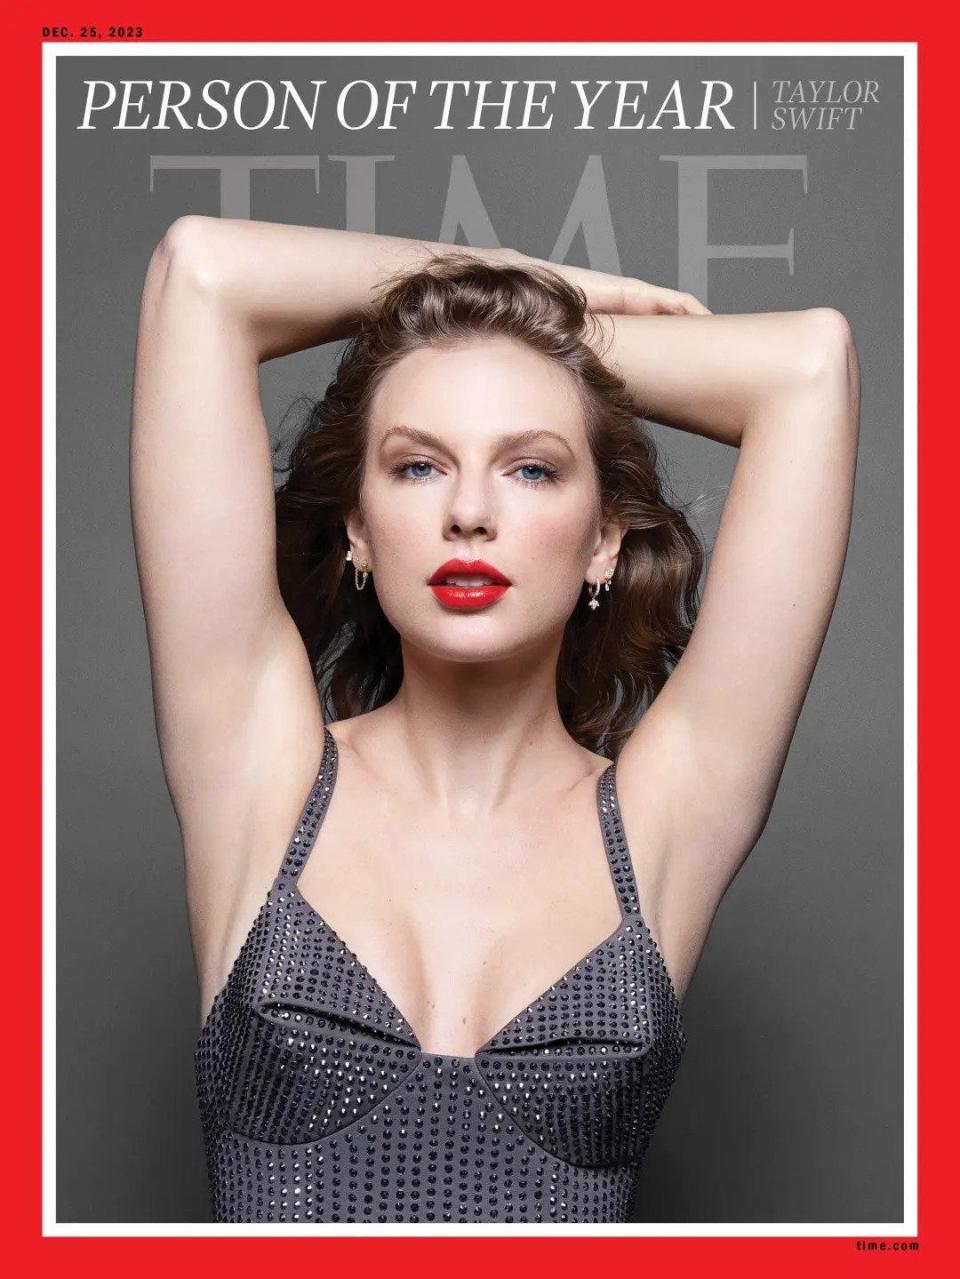 The cover of Time magazine announcing Taylor Swift as its Person of the Year for 2023.